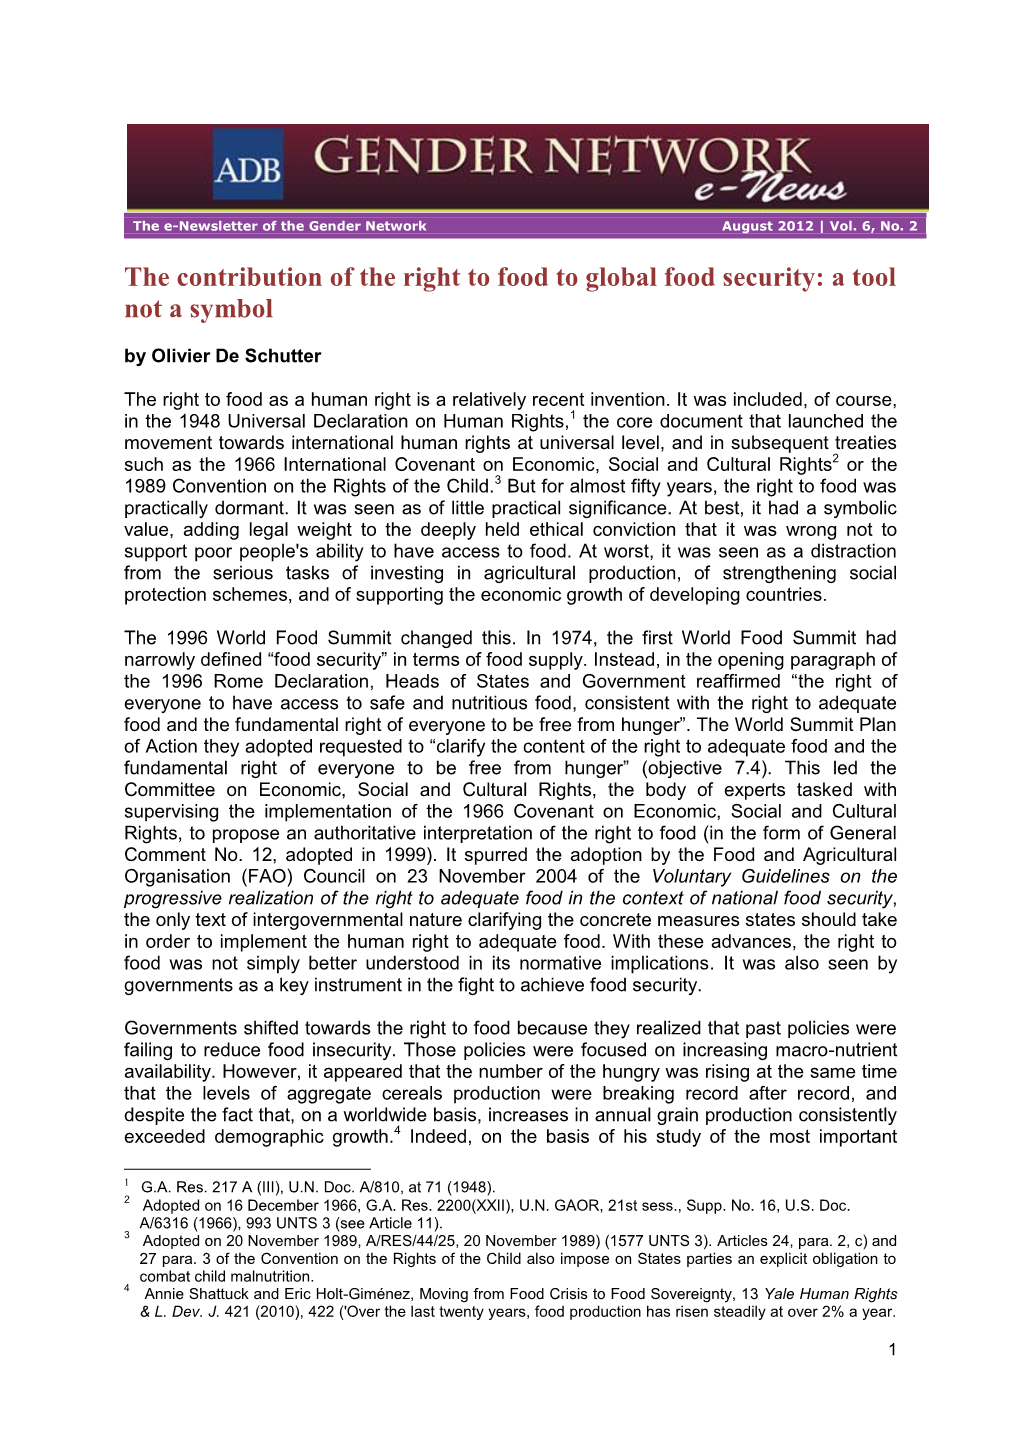 The Contribution of the Right to Food and Global Food Security